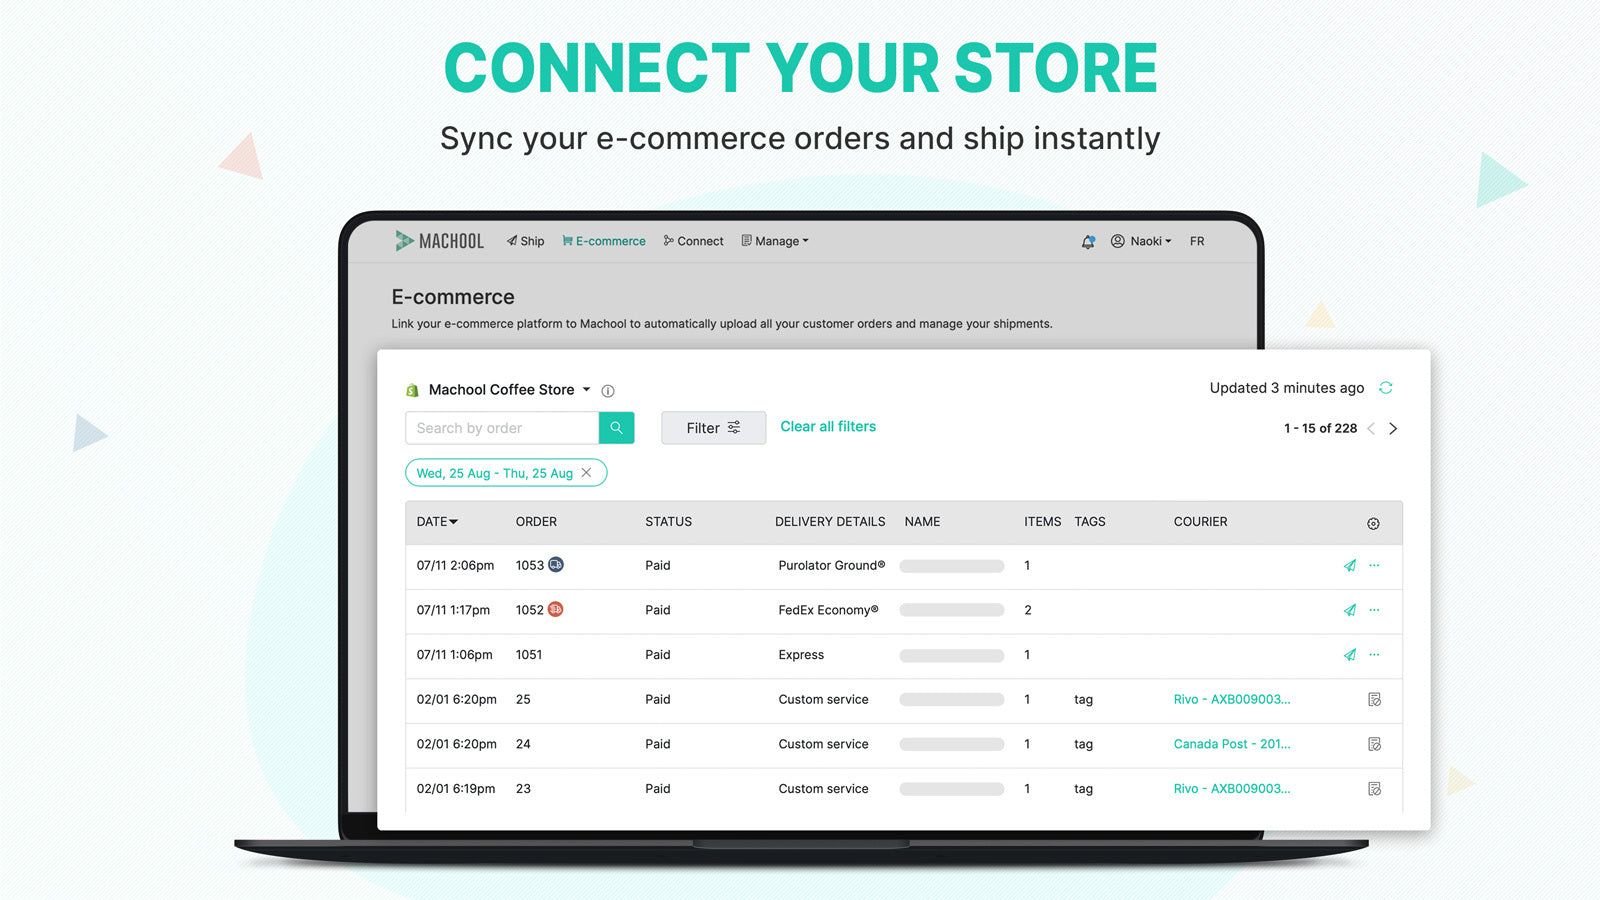 E-commerce order page